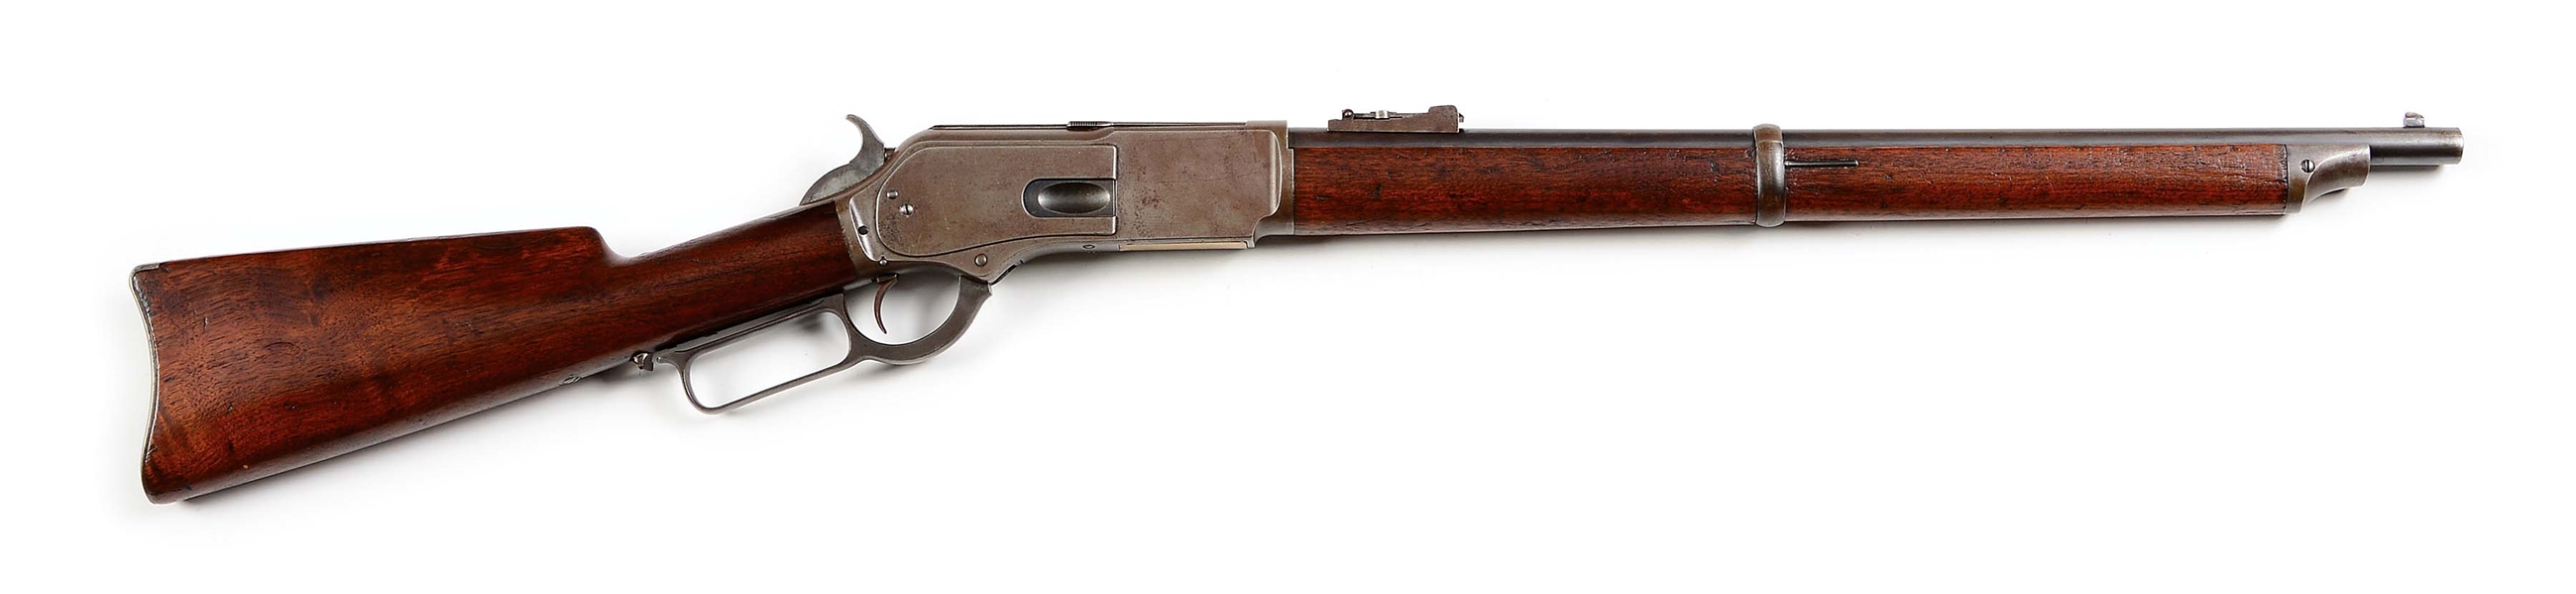 (A) NORTHWEST MOUNTED POLICE WINCHESTER 1876 CARBINE.